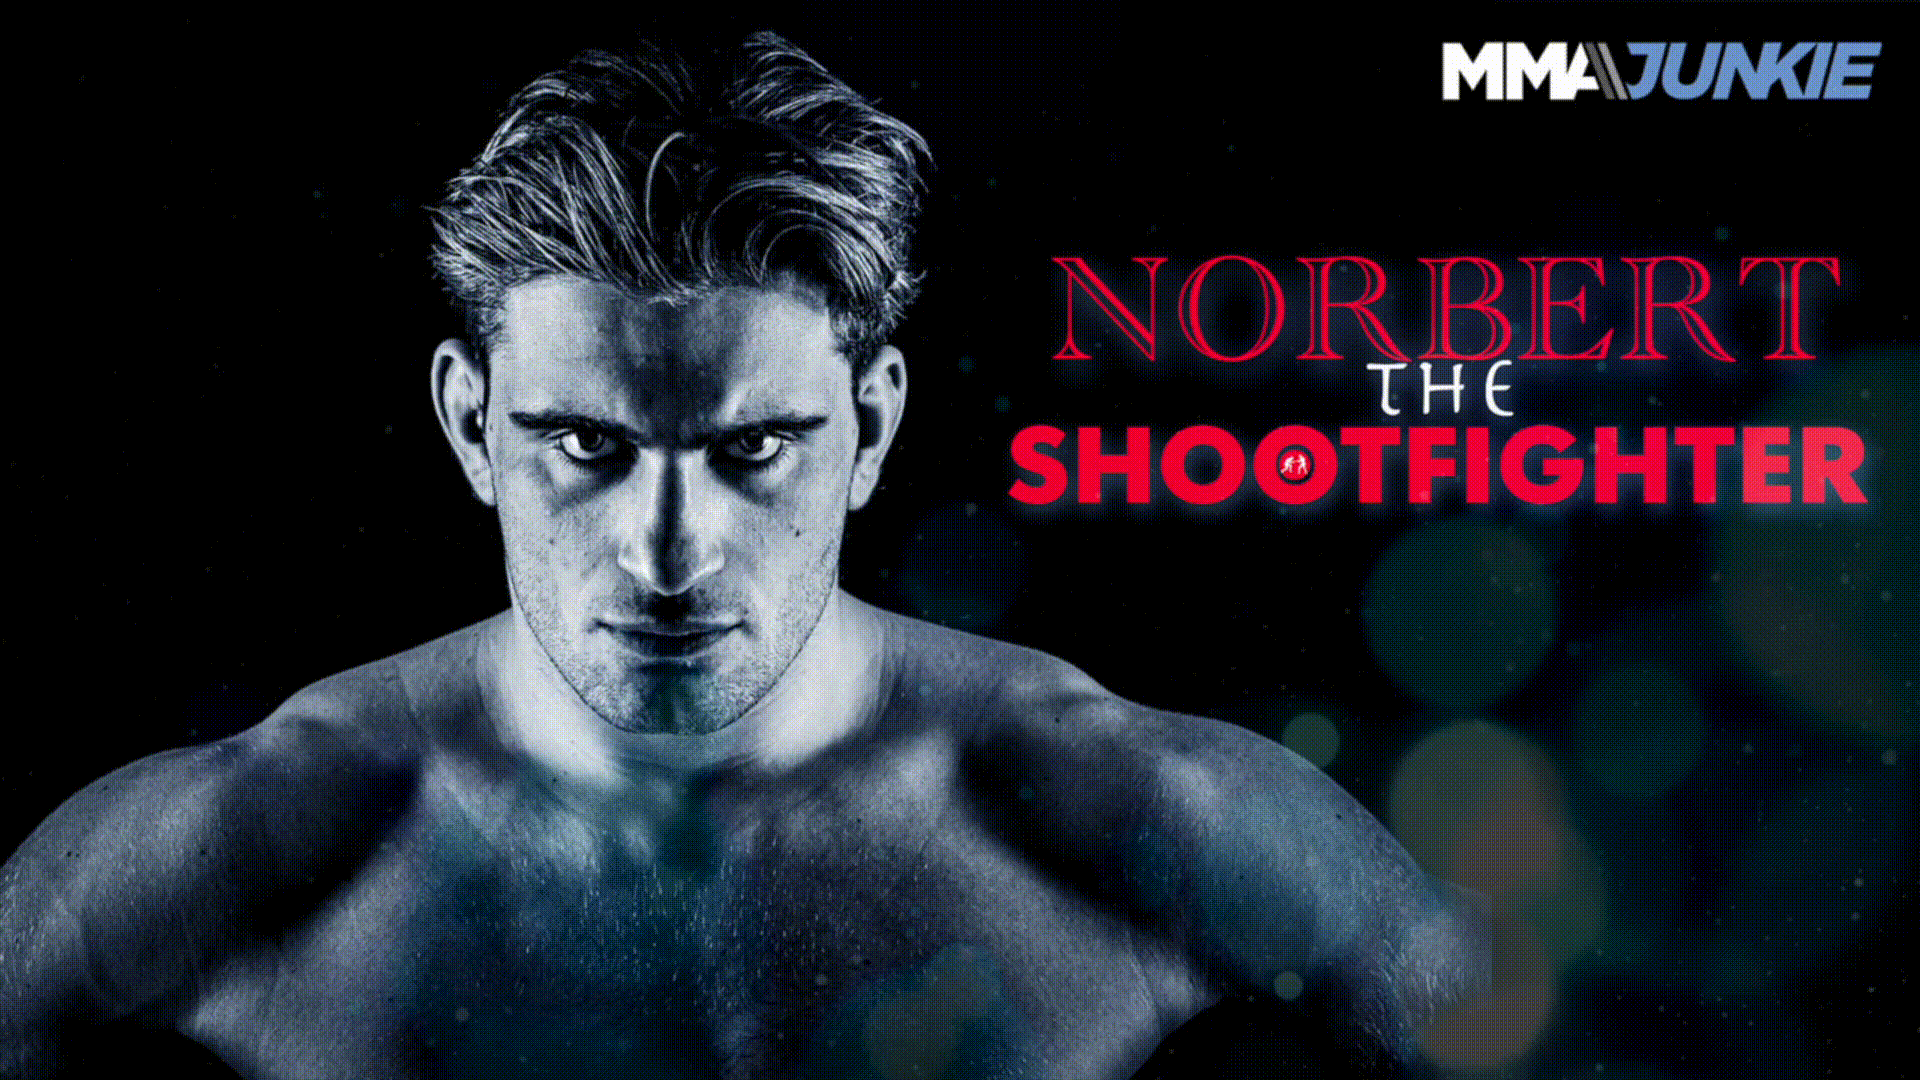 ‘On his way to greatness’: Norbert the Shootfighter | Video